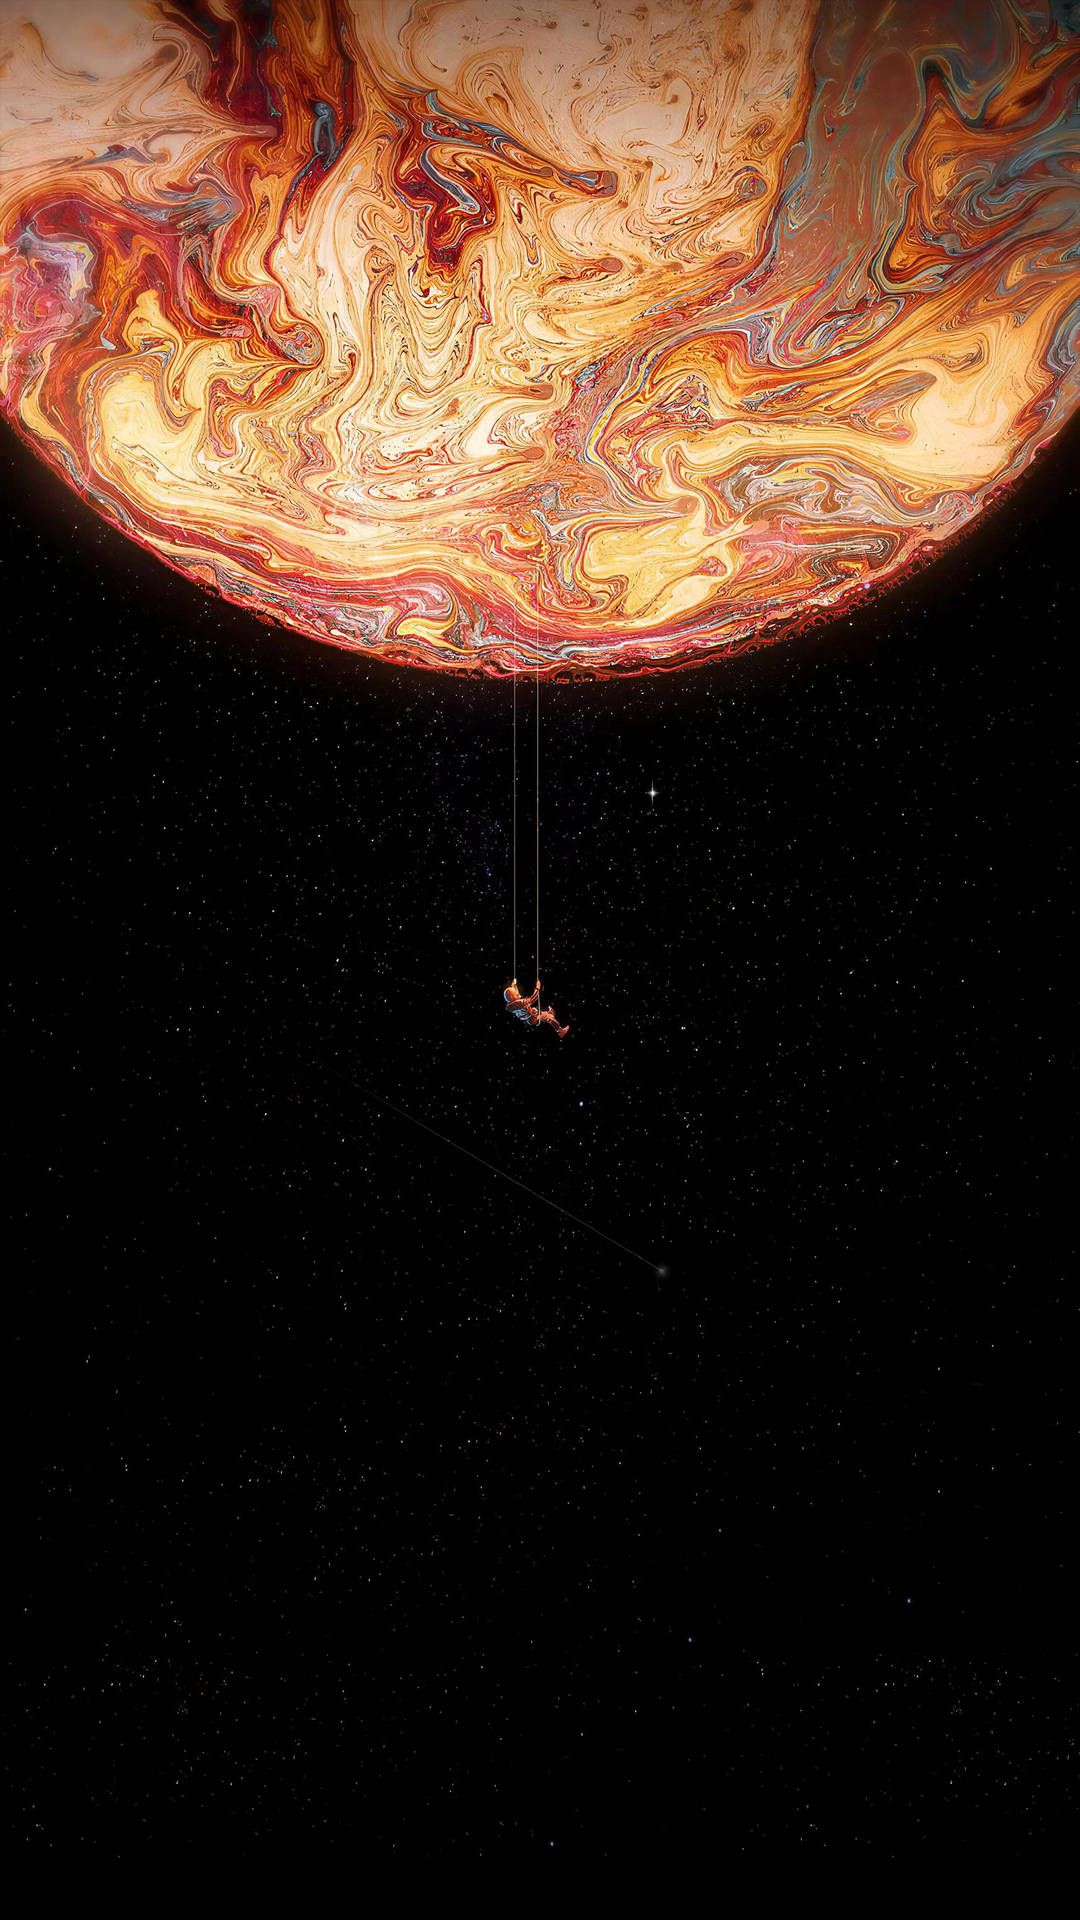 IPhone wallpaper of a person swinging on a rope in space - Mars